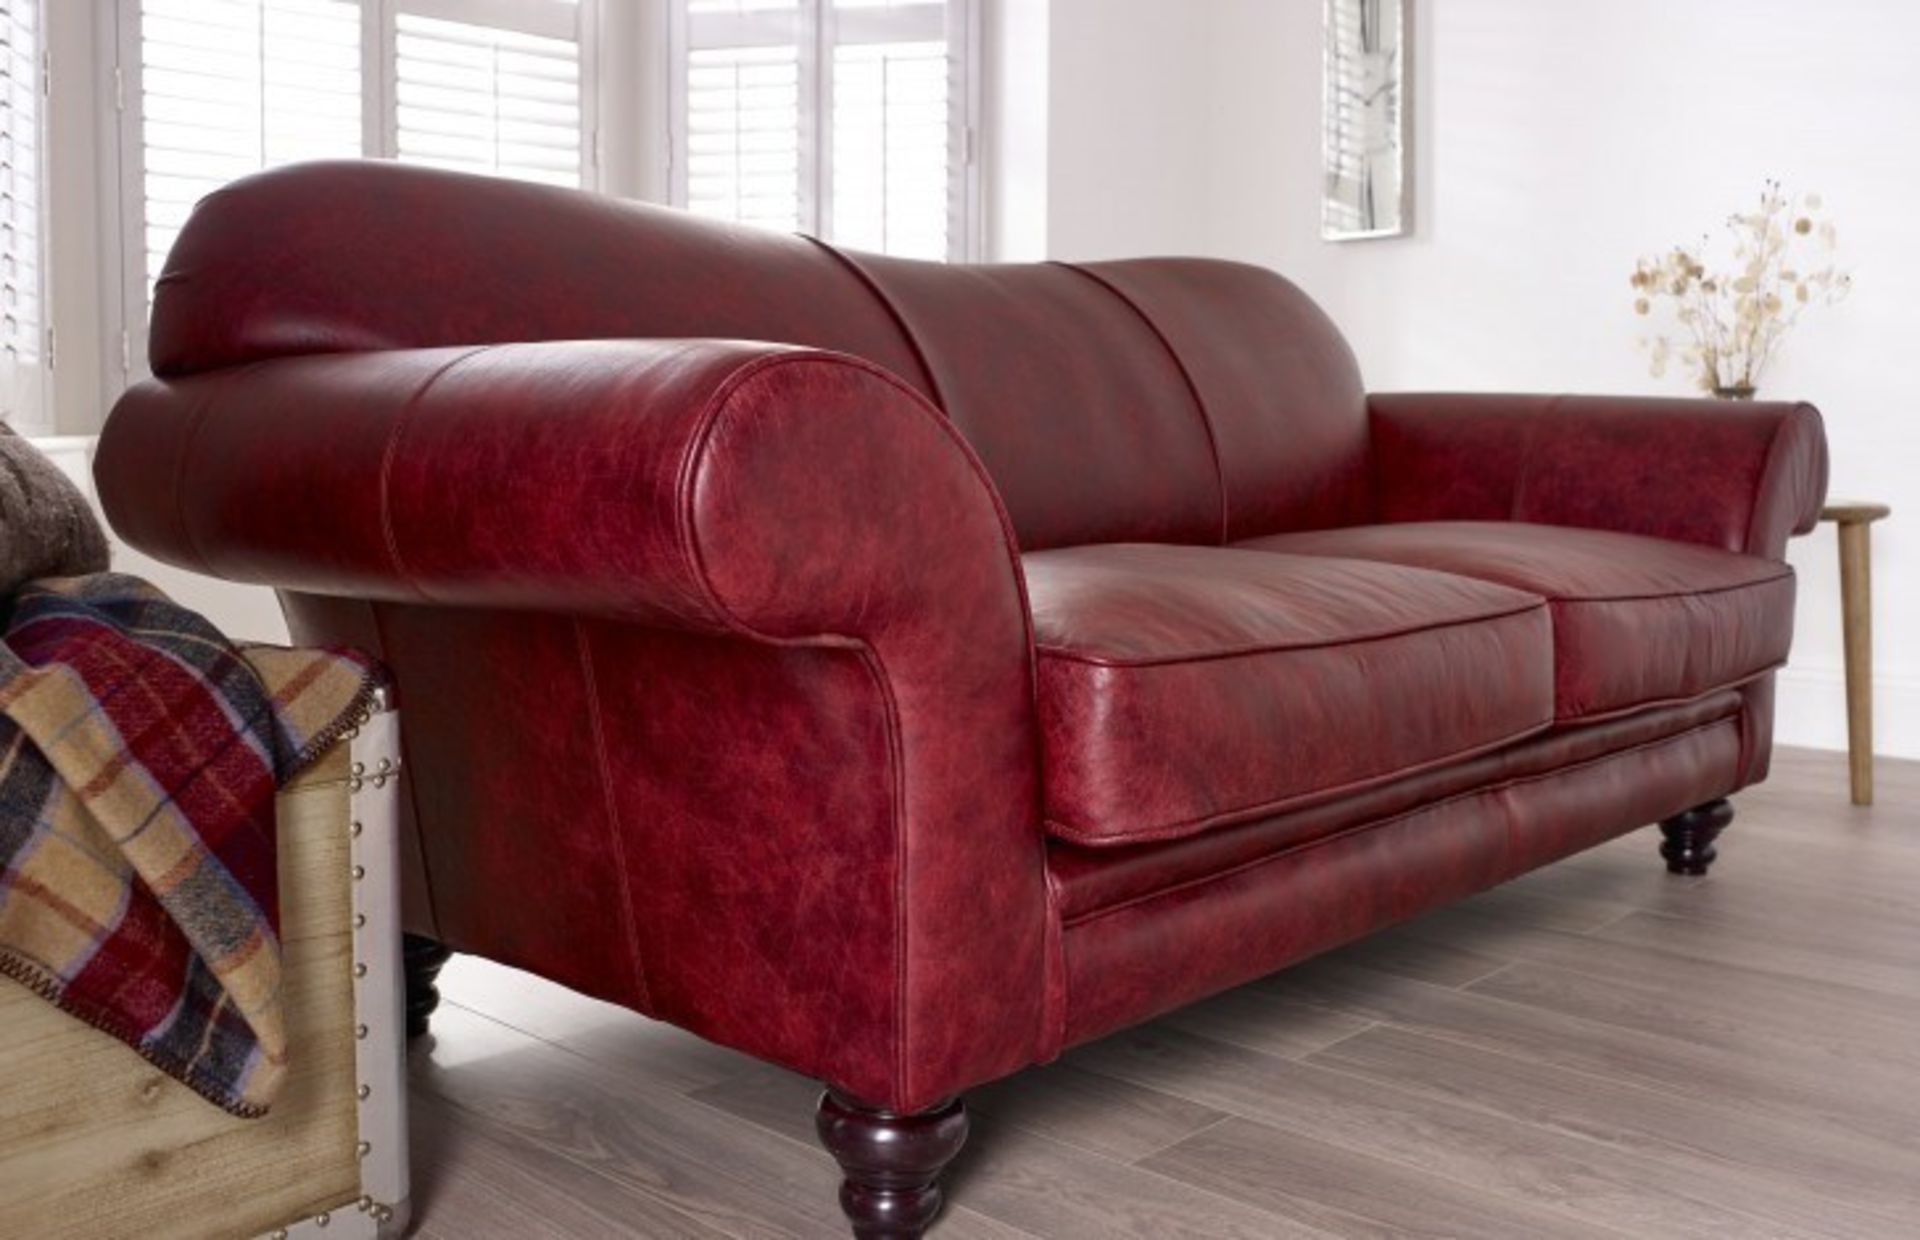 Leather Sofa 4 Seater - Image 2 of 2